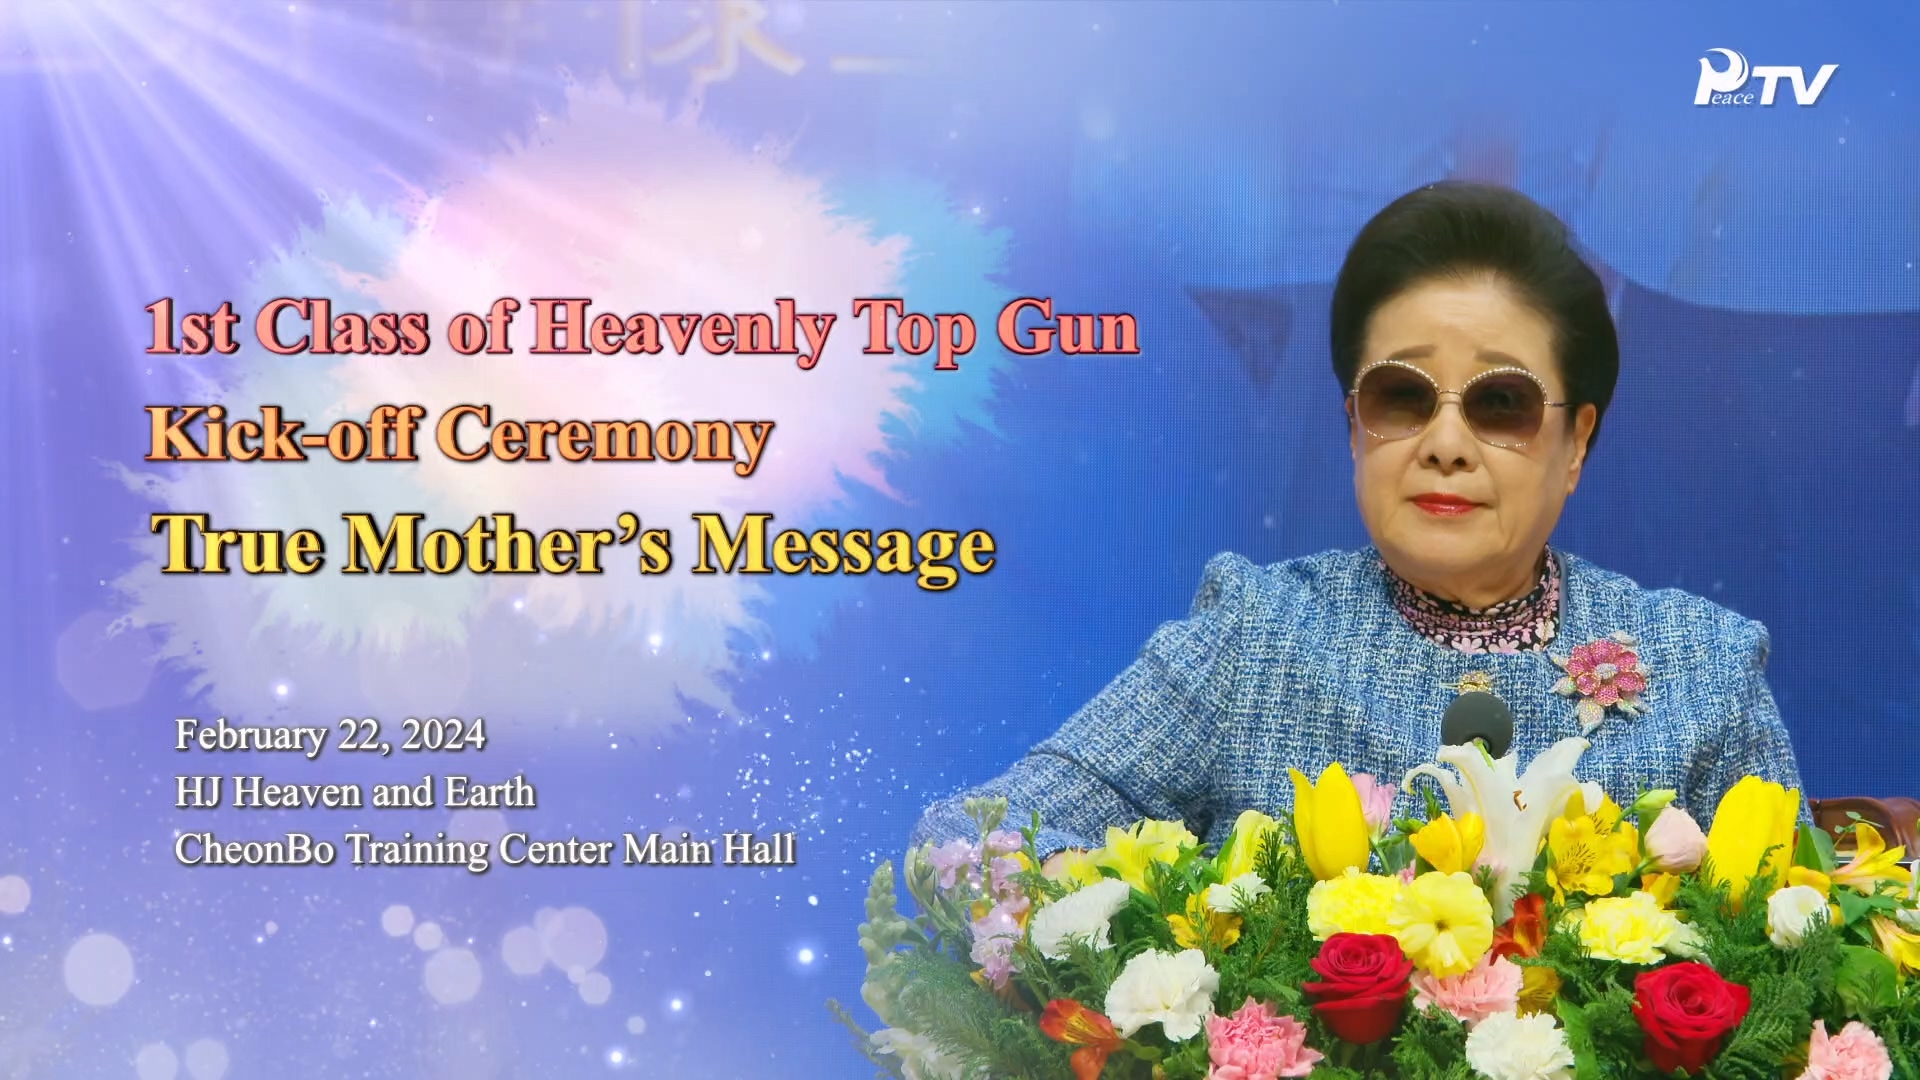 True Mother's message - 1st Class of Heavenly Top Gun Kick-off Ceremony (February 22, 2024)